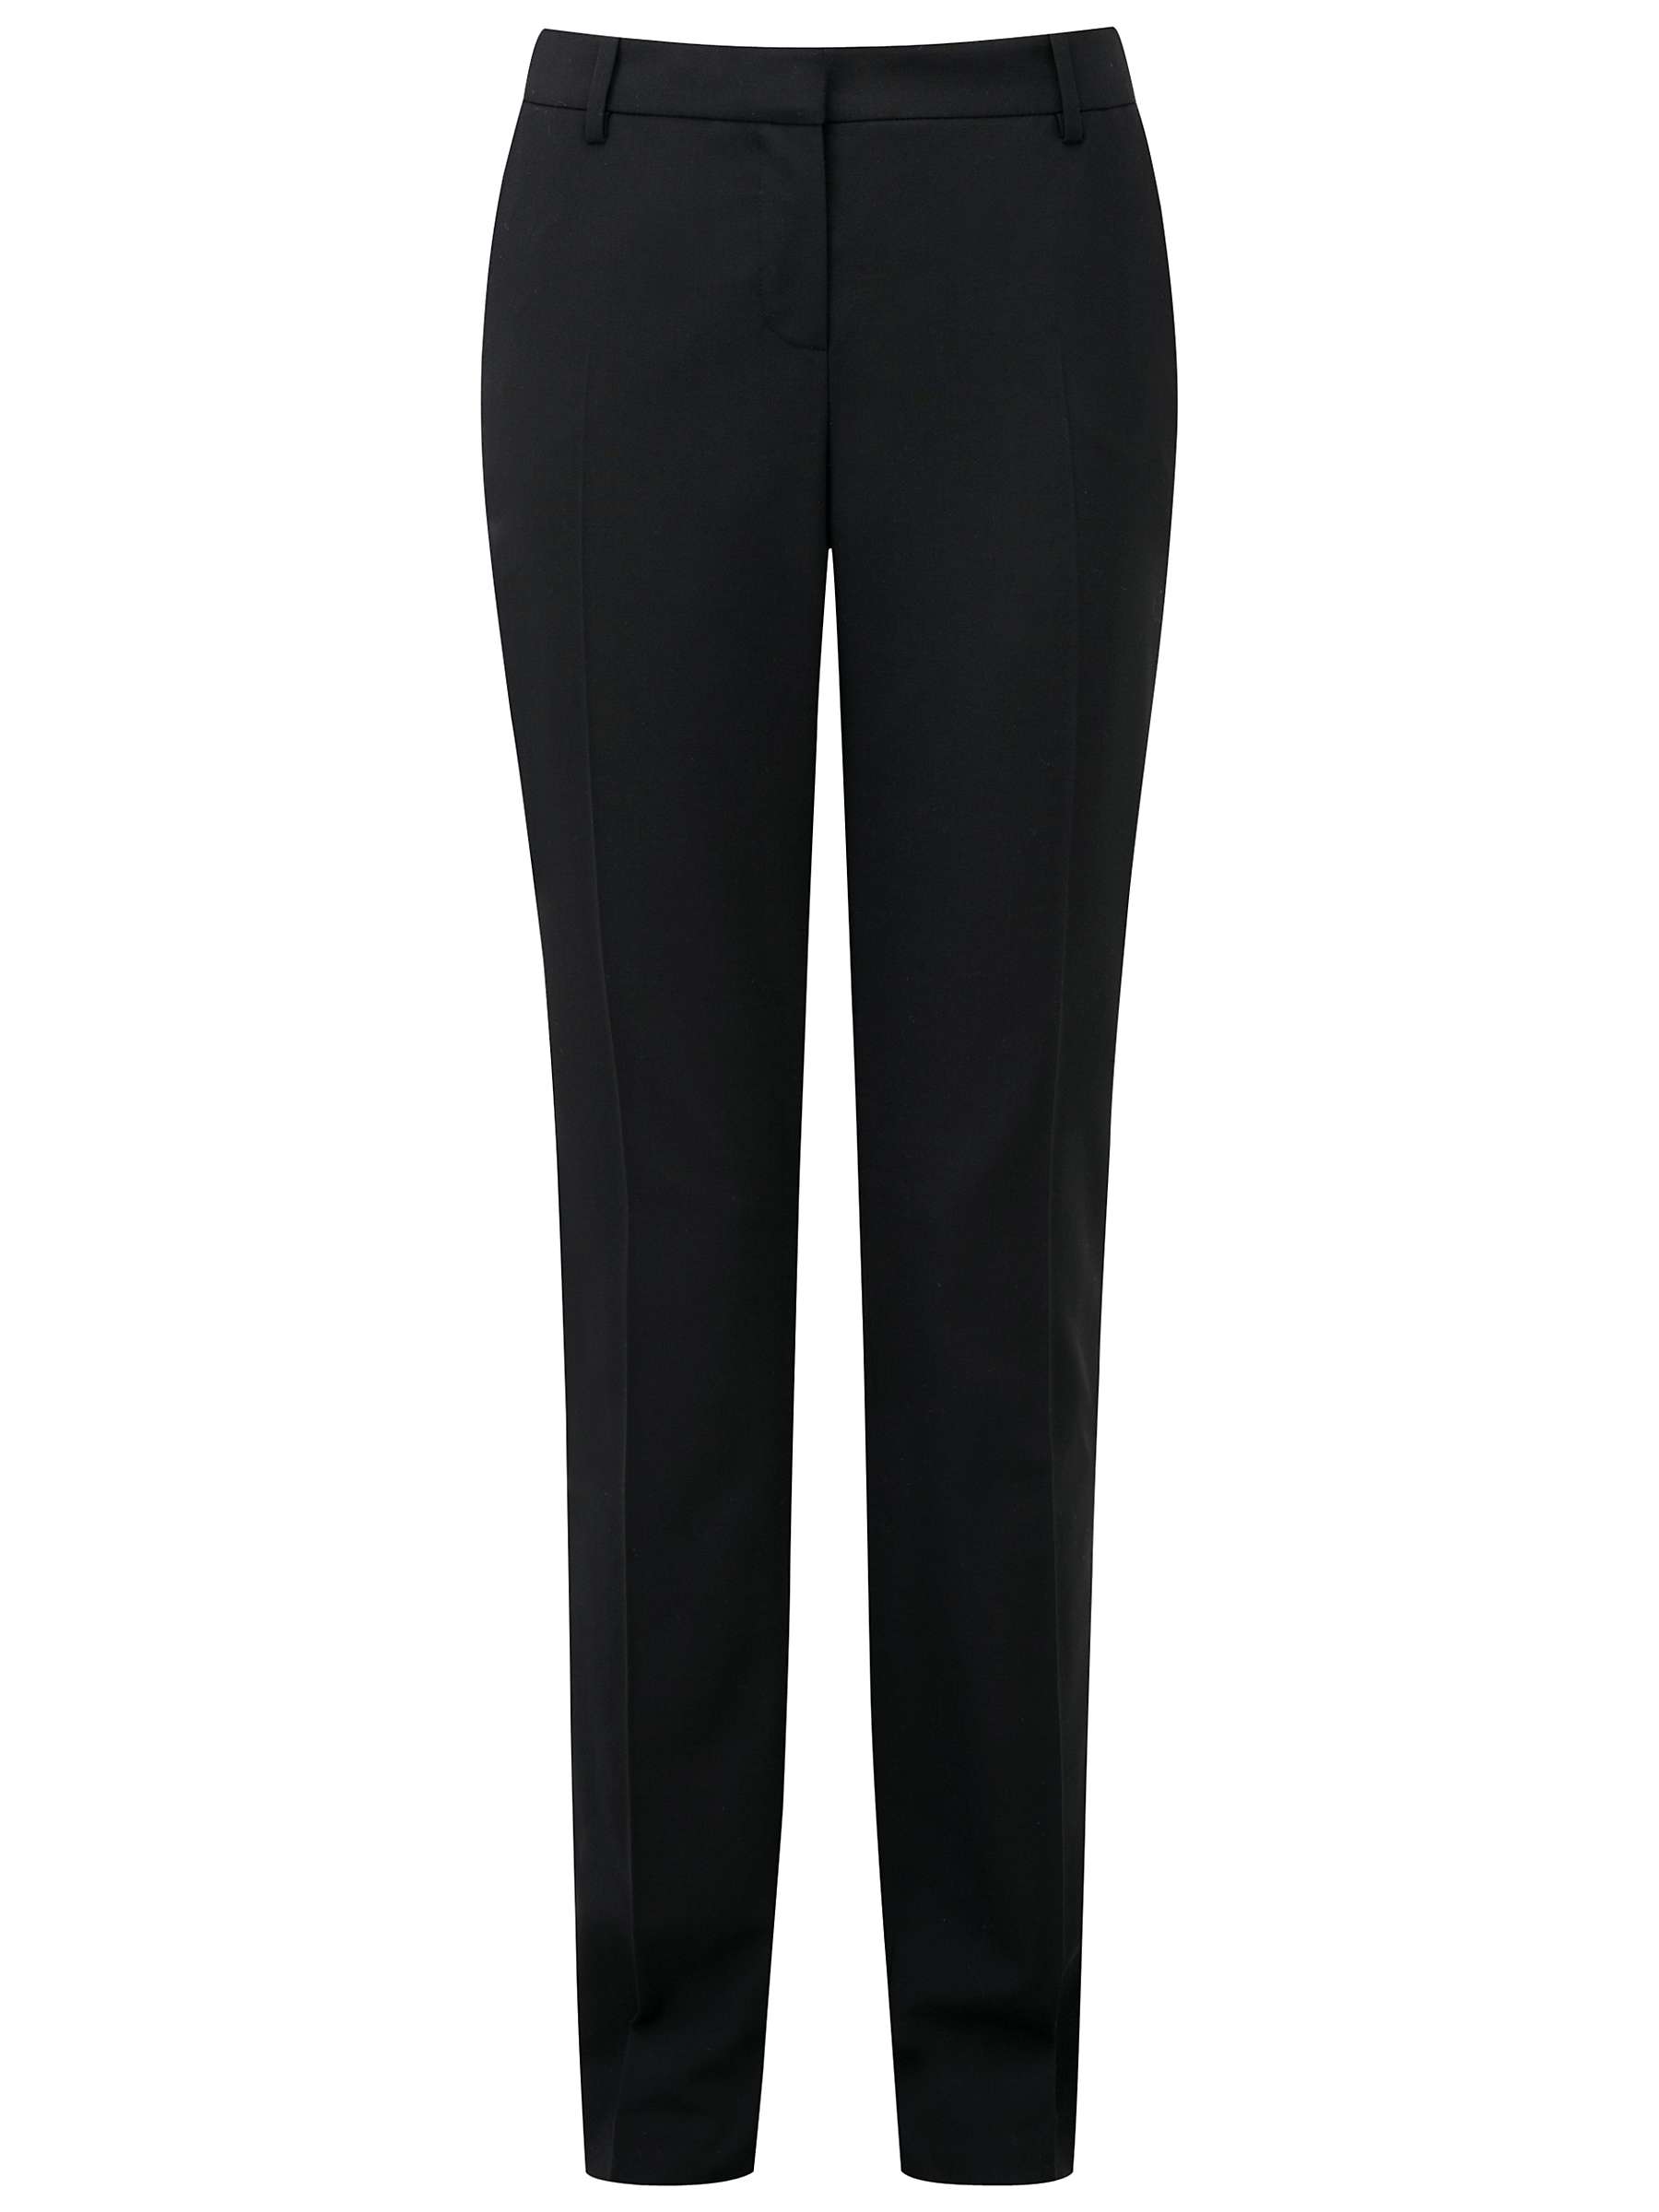 Buy Pure Collection Lana Slim Leg Trousers, Black Online at johnlewis.com